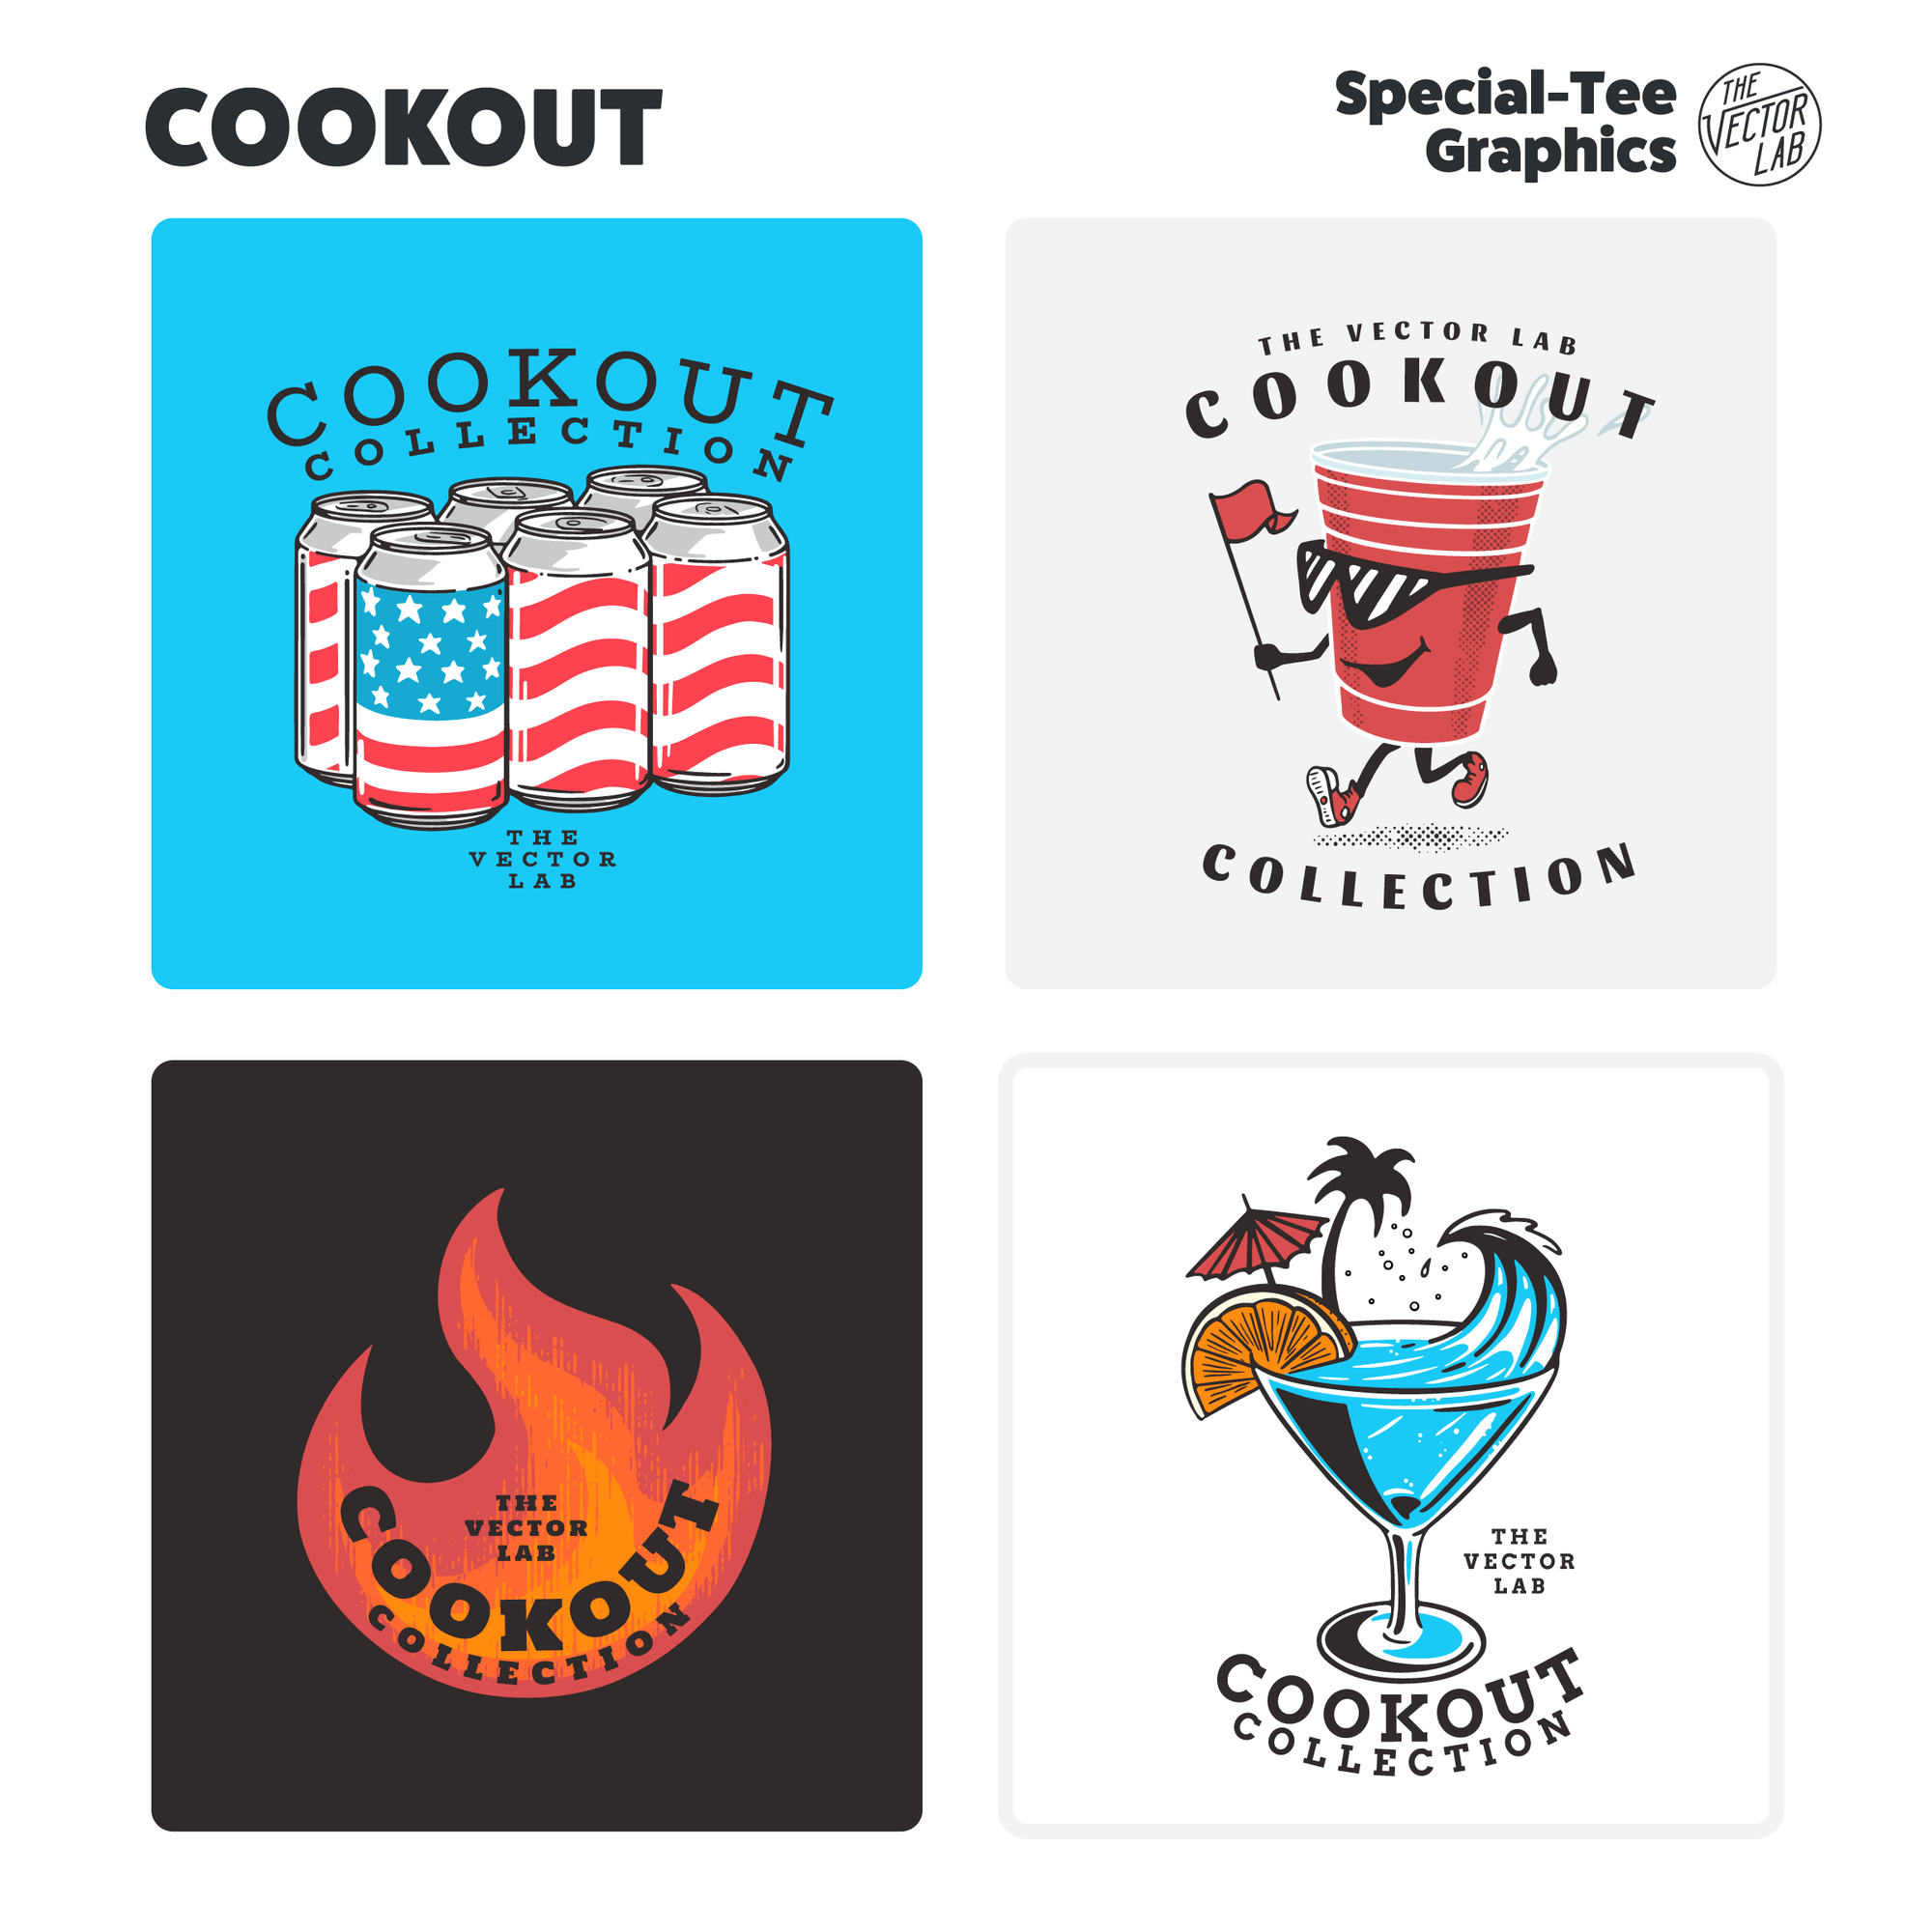 Cookout Collection Graphics for Adobe Affinity CorelDraw